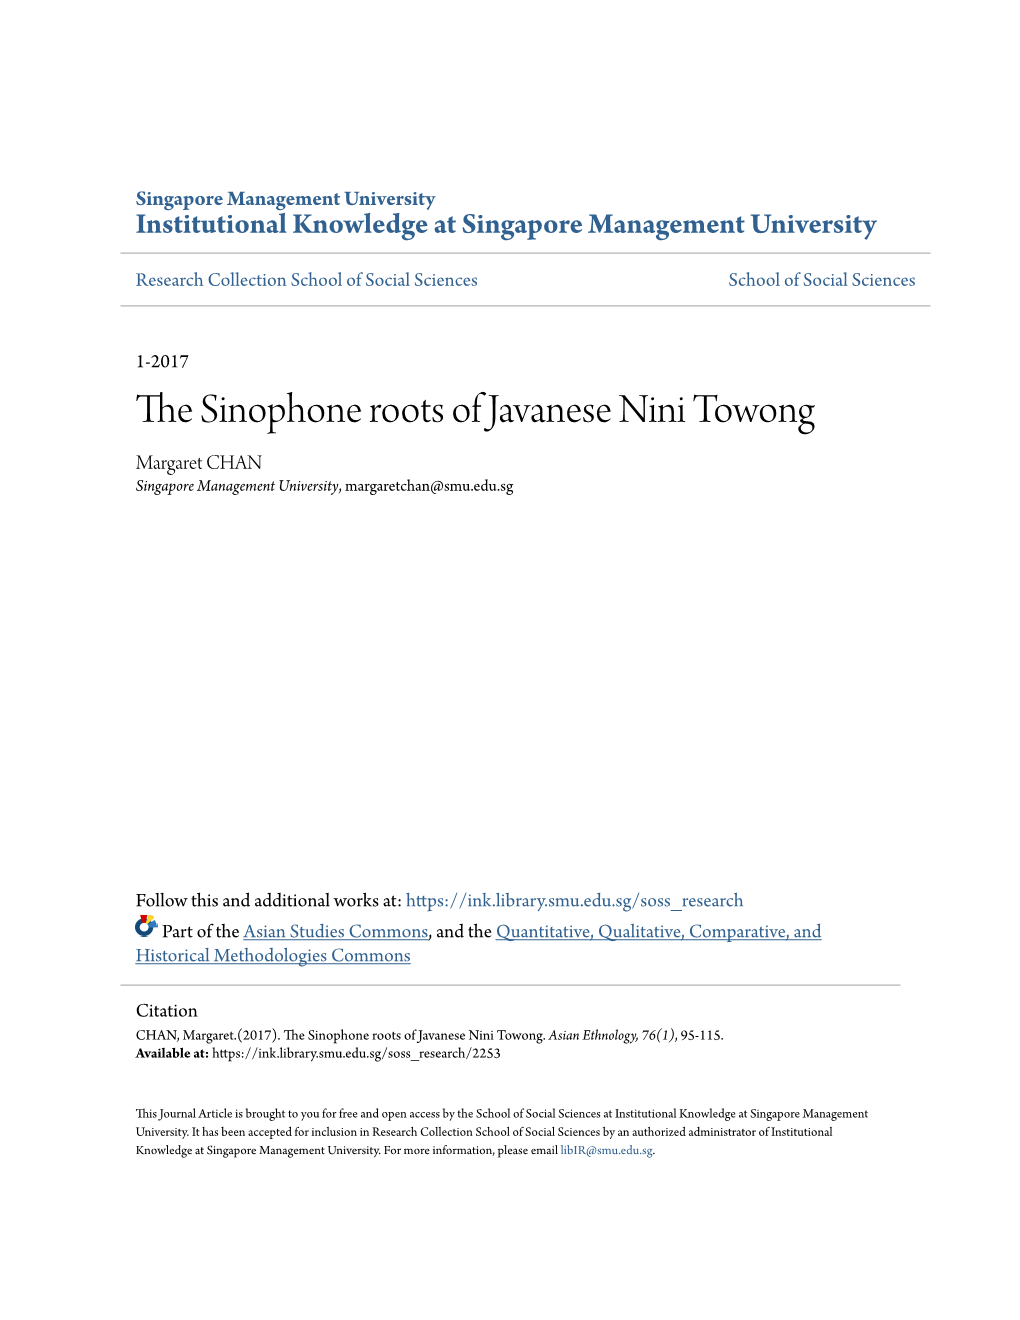 The Sinophone Roots of Javanese Nini Towong